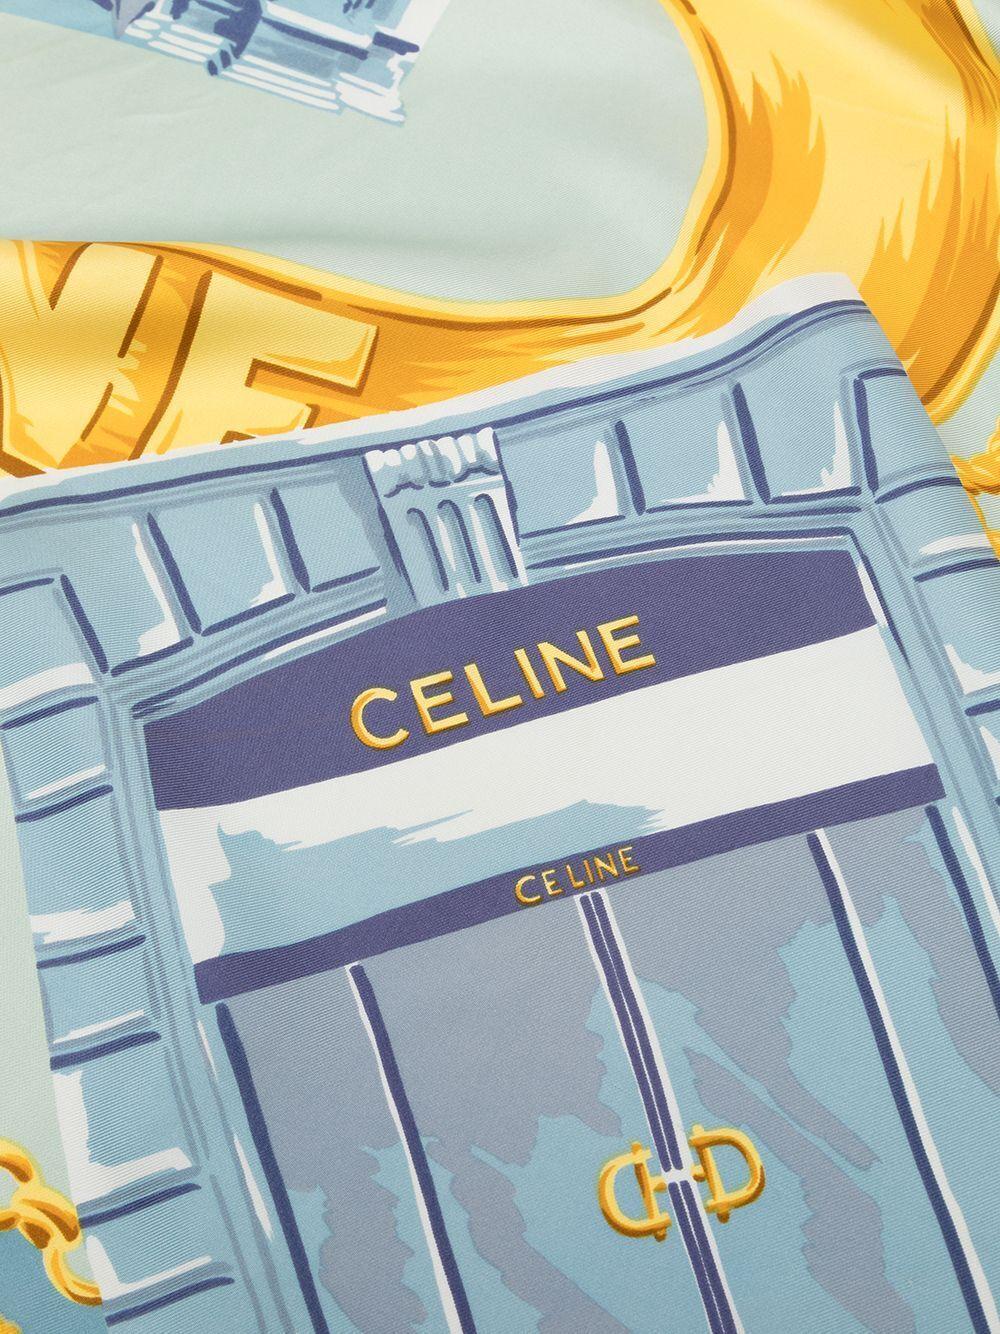 Celine silk scarf with an Arc de Triomphe motif on a light blue background. This versatile piece would look great with any outfit but can also be framed as decor, or loosely tied around the handles of your handbag.

Measurements: Length 90 cm, Width